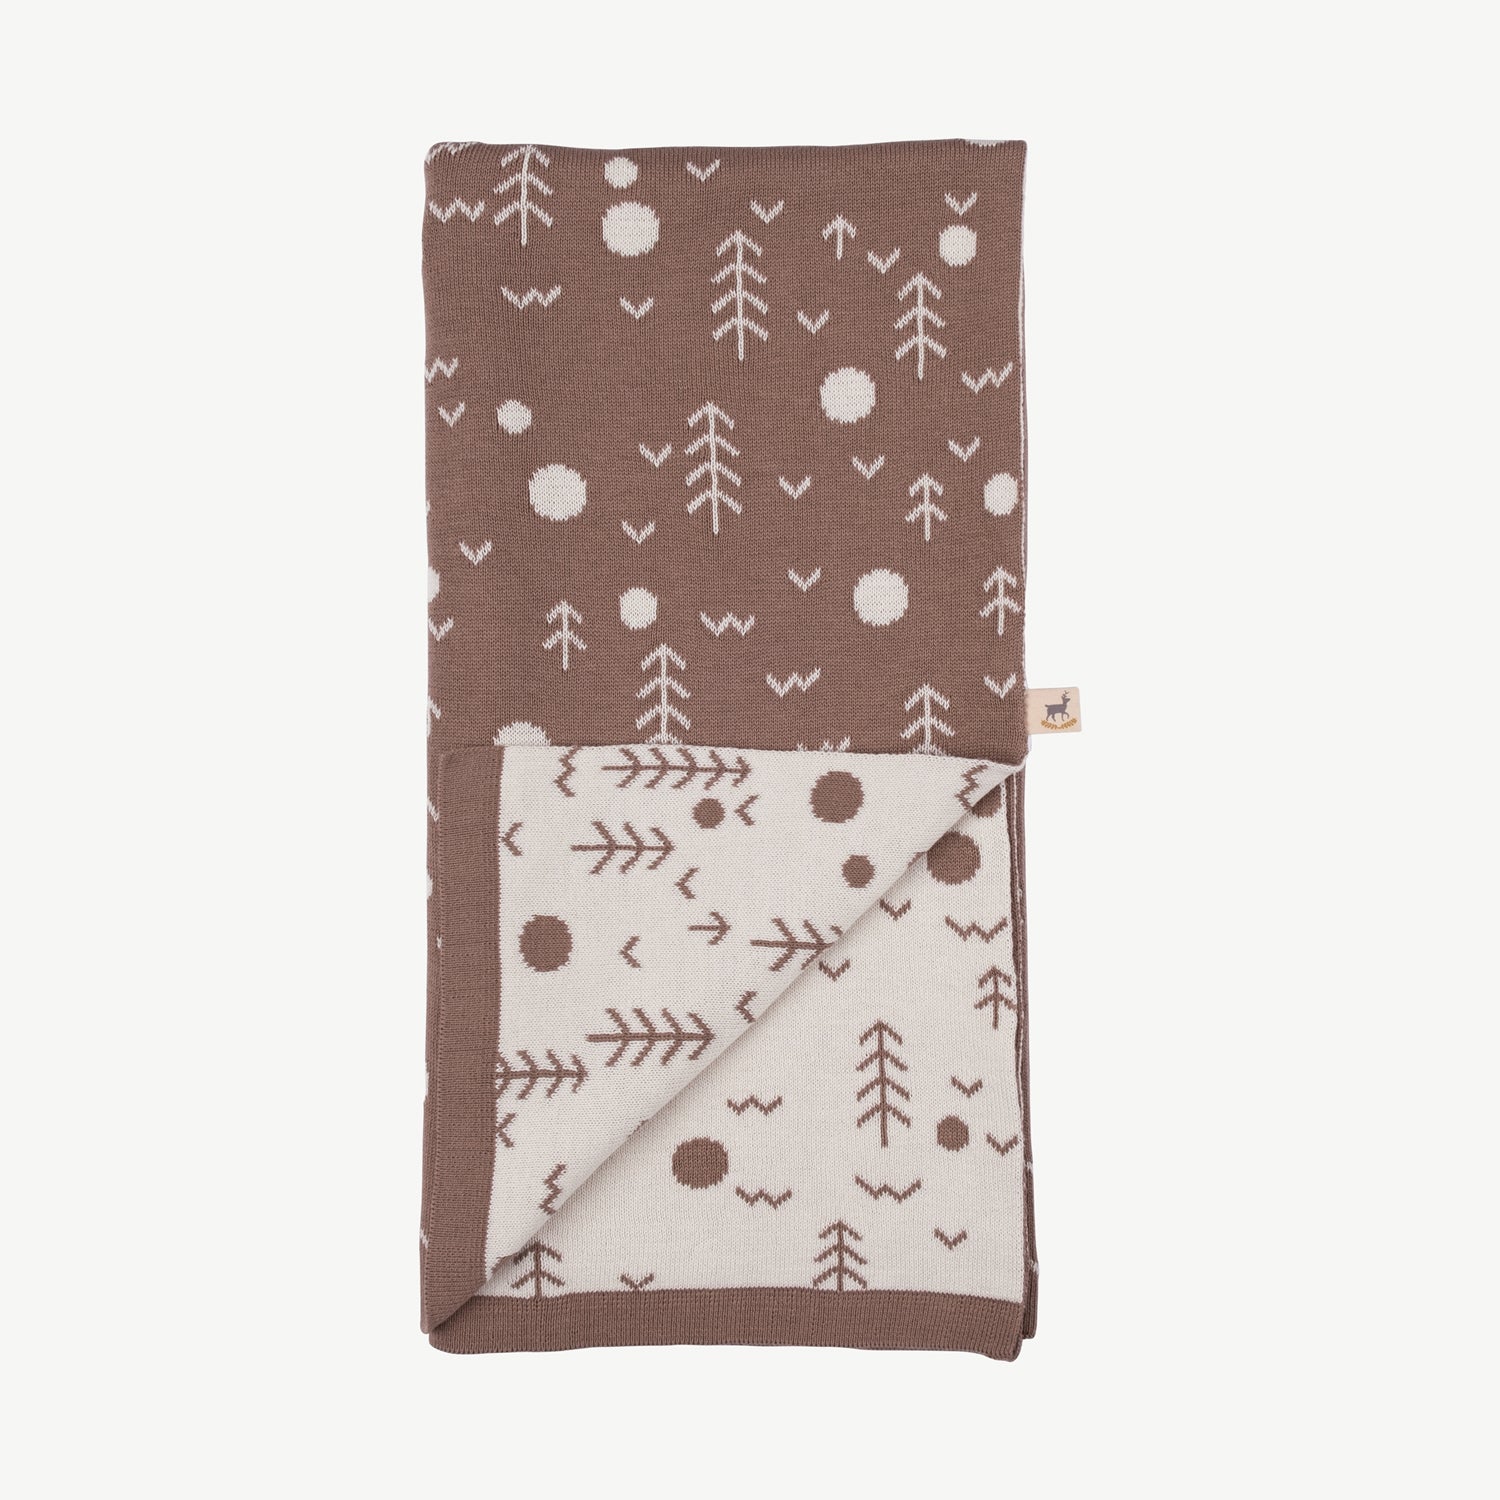 'the woods' light taupe knit blanket